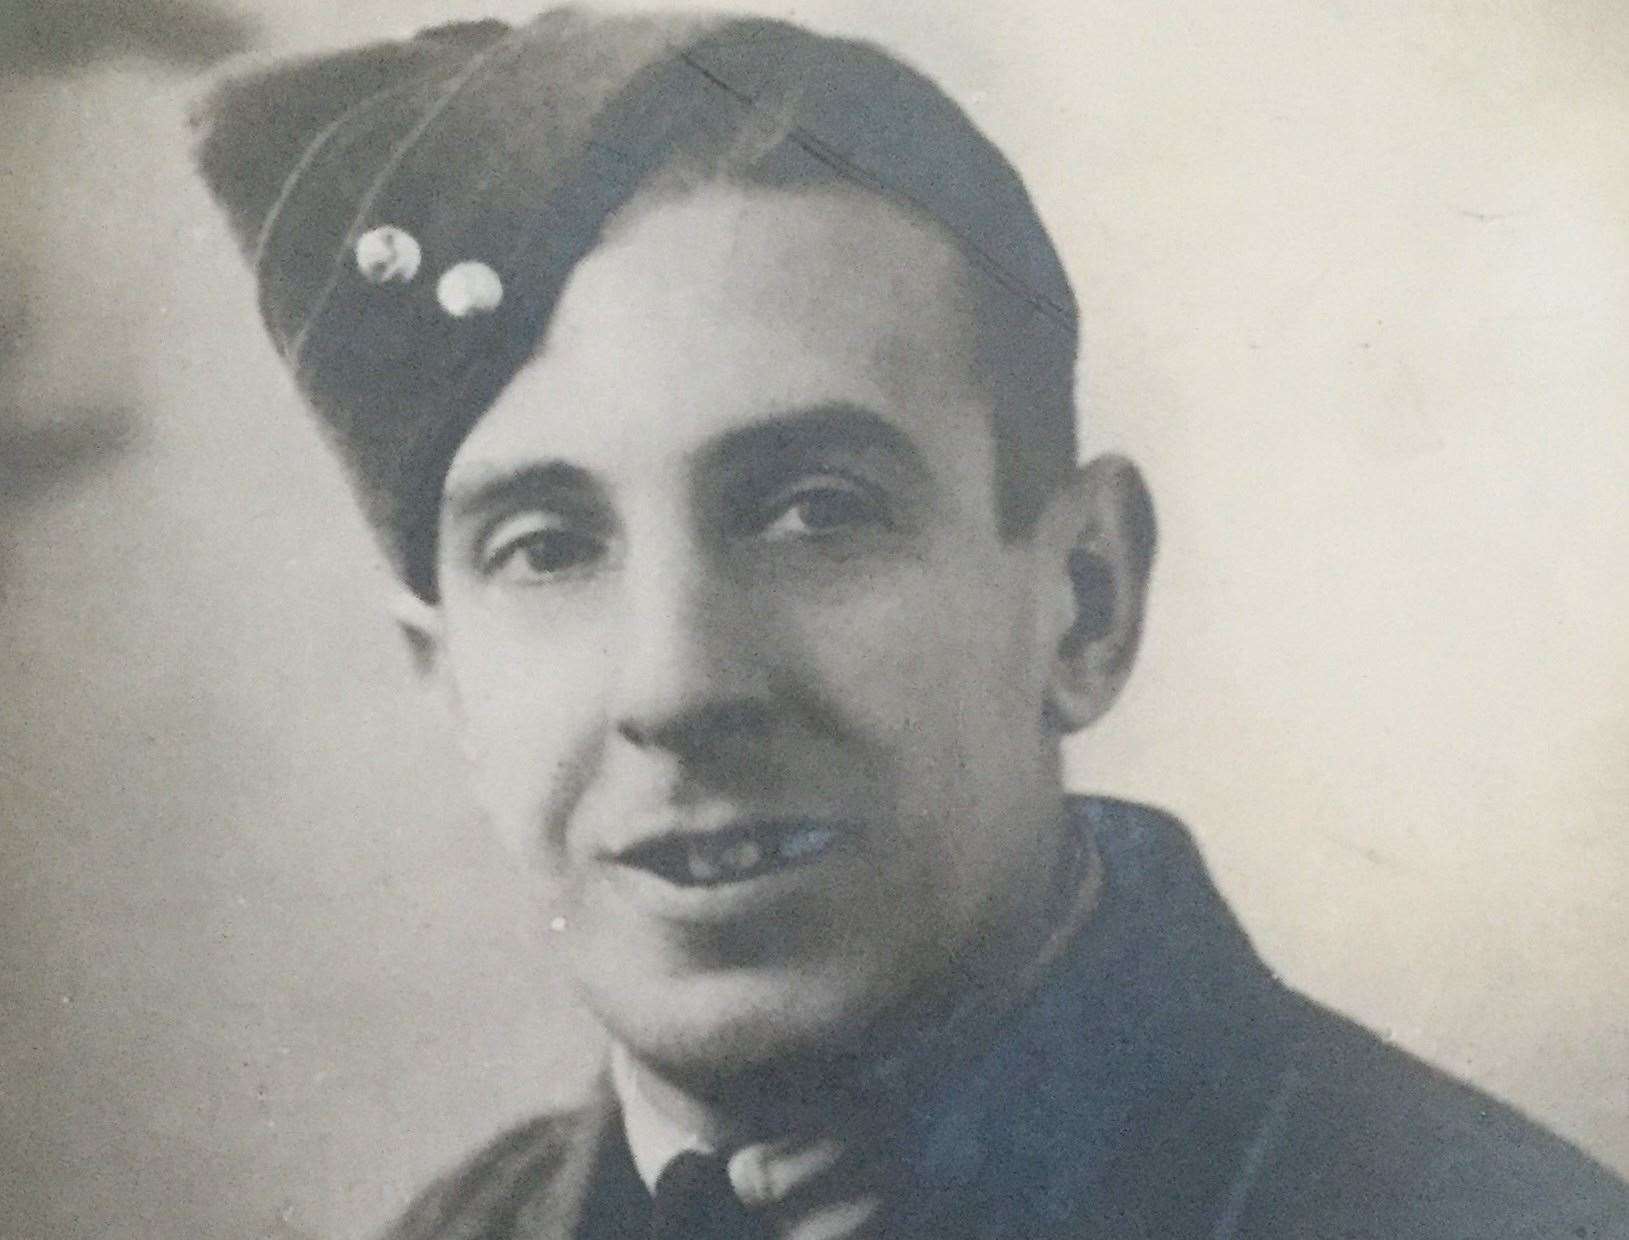 Sgt Leonard Shrubsall was 30 when the Short Stirling Bomber was lost